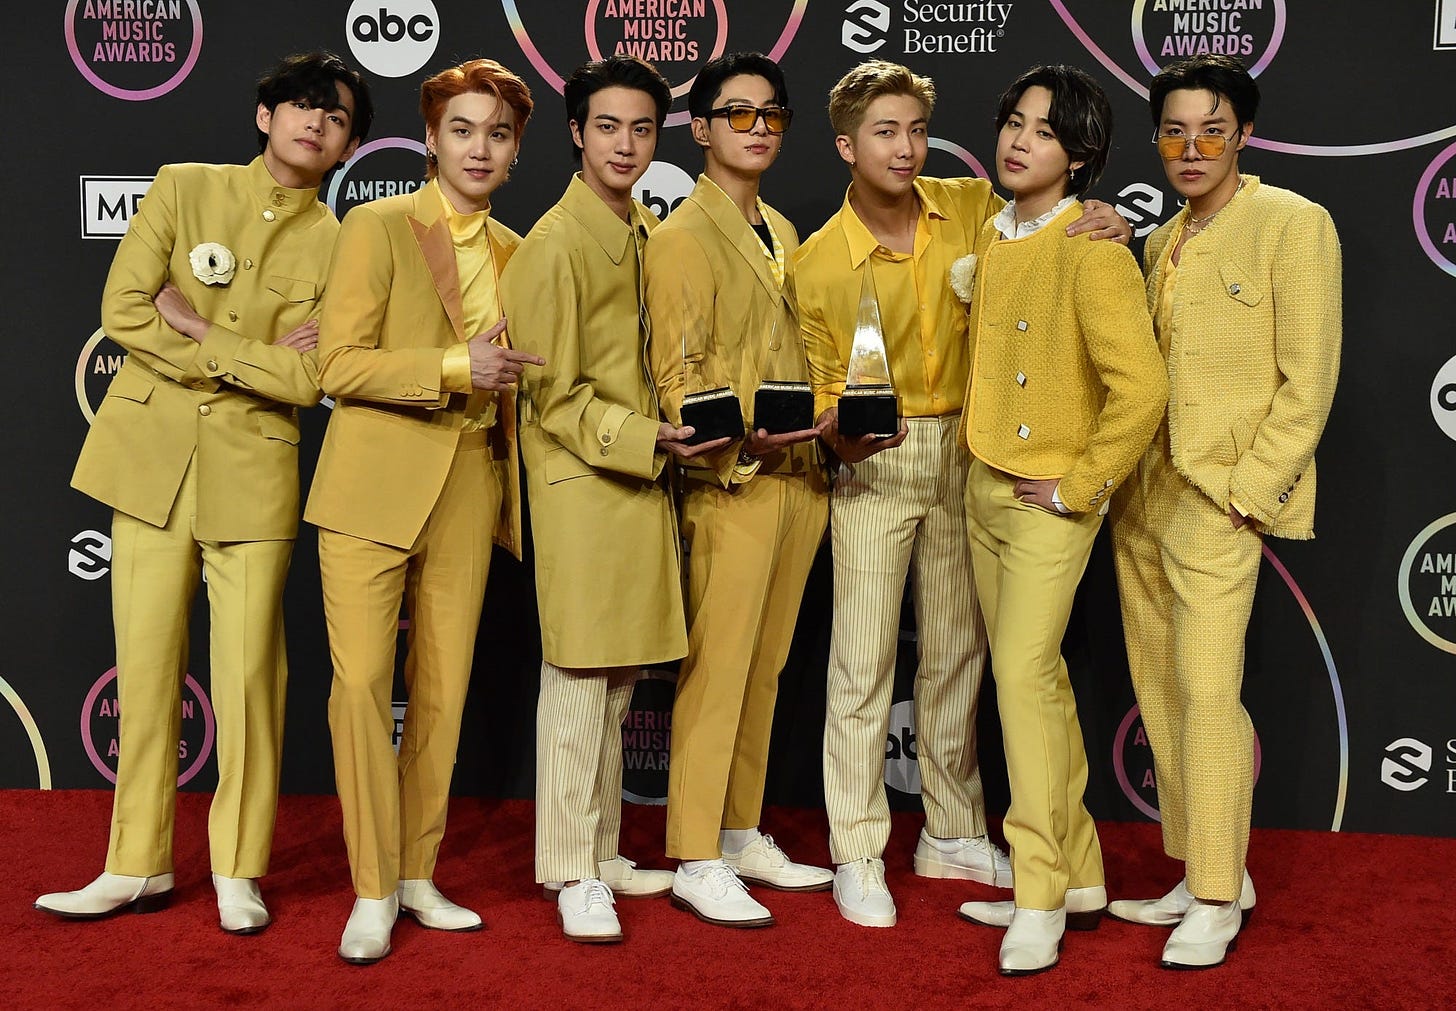 AMAs 2021 winners: BTS wins artist of the year award for first time